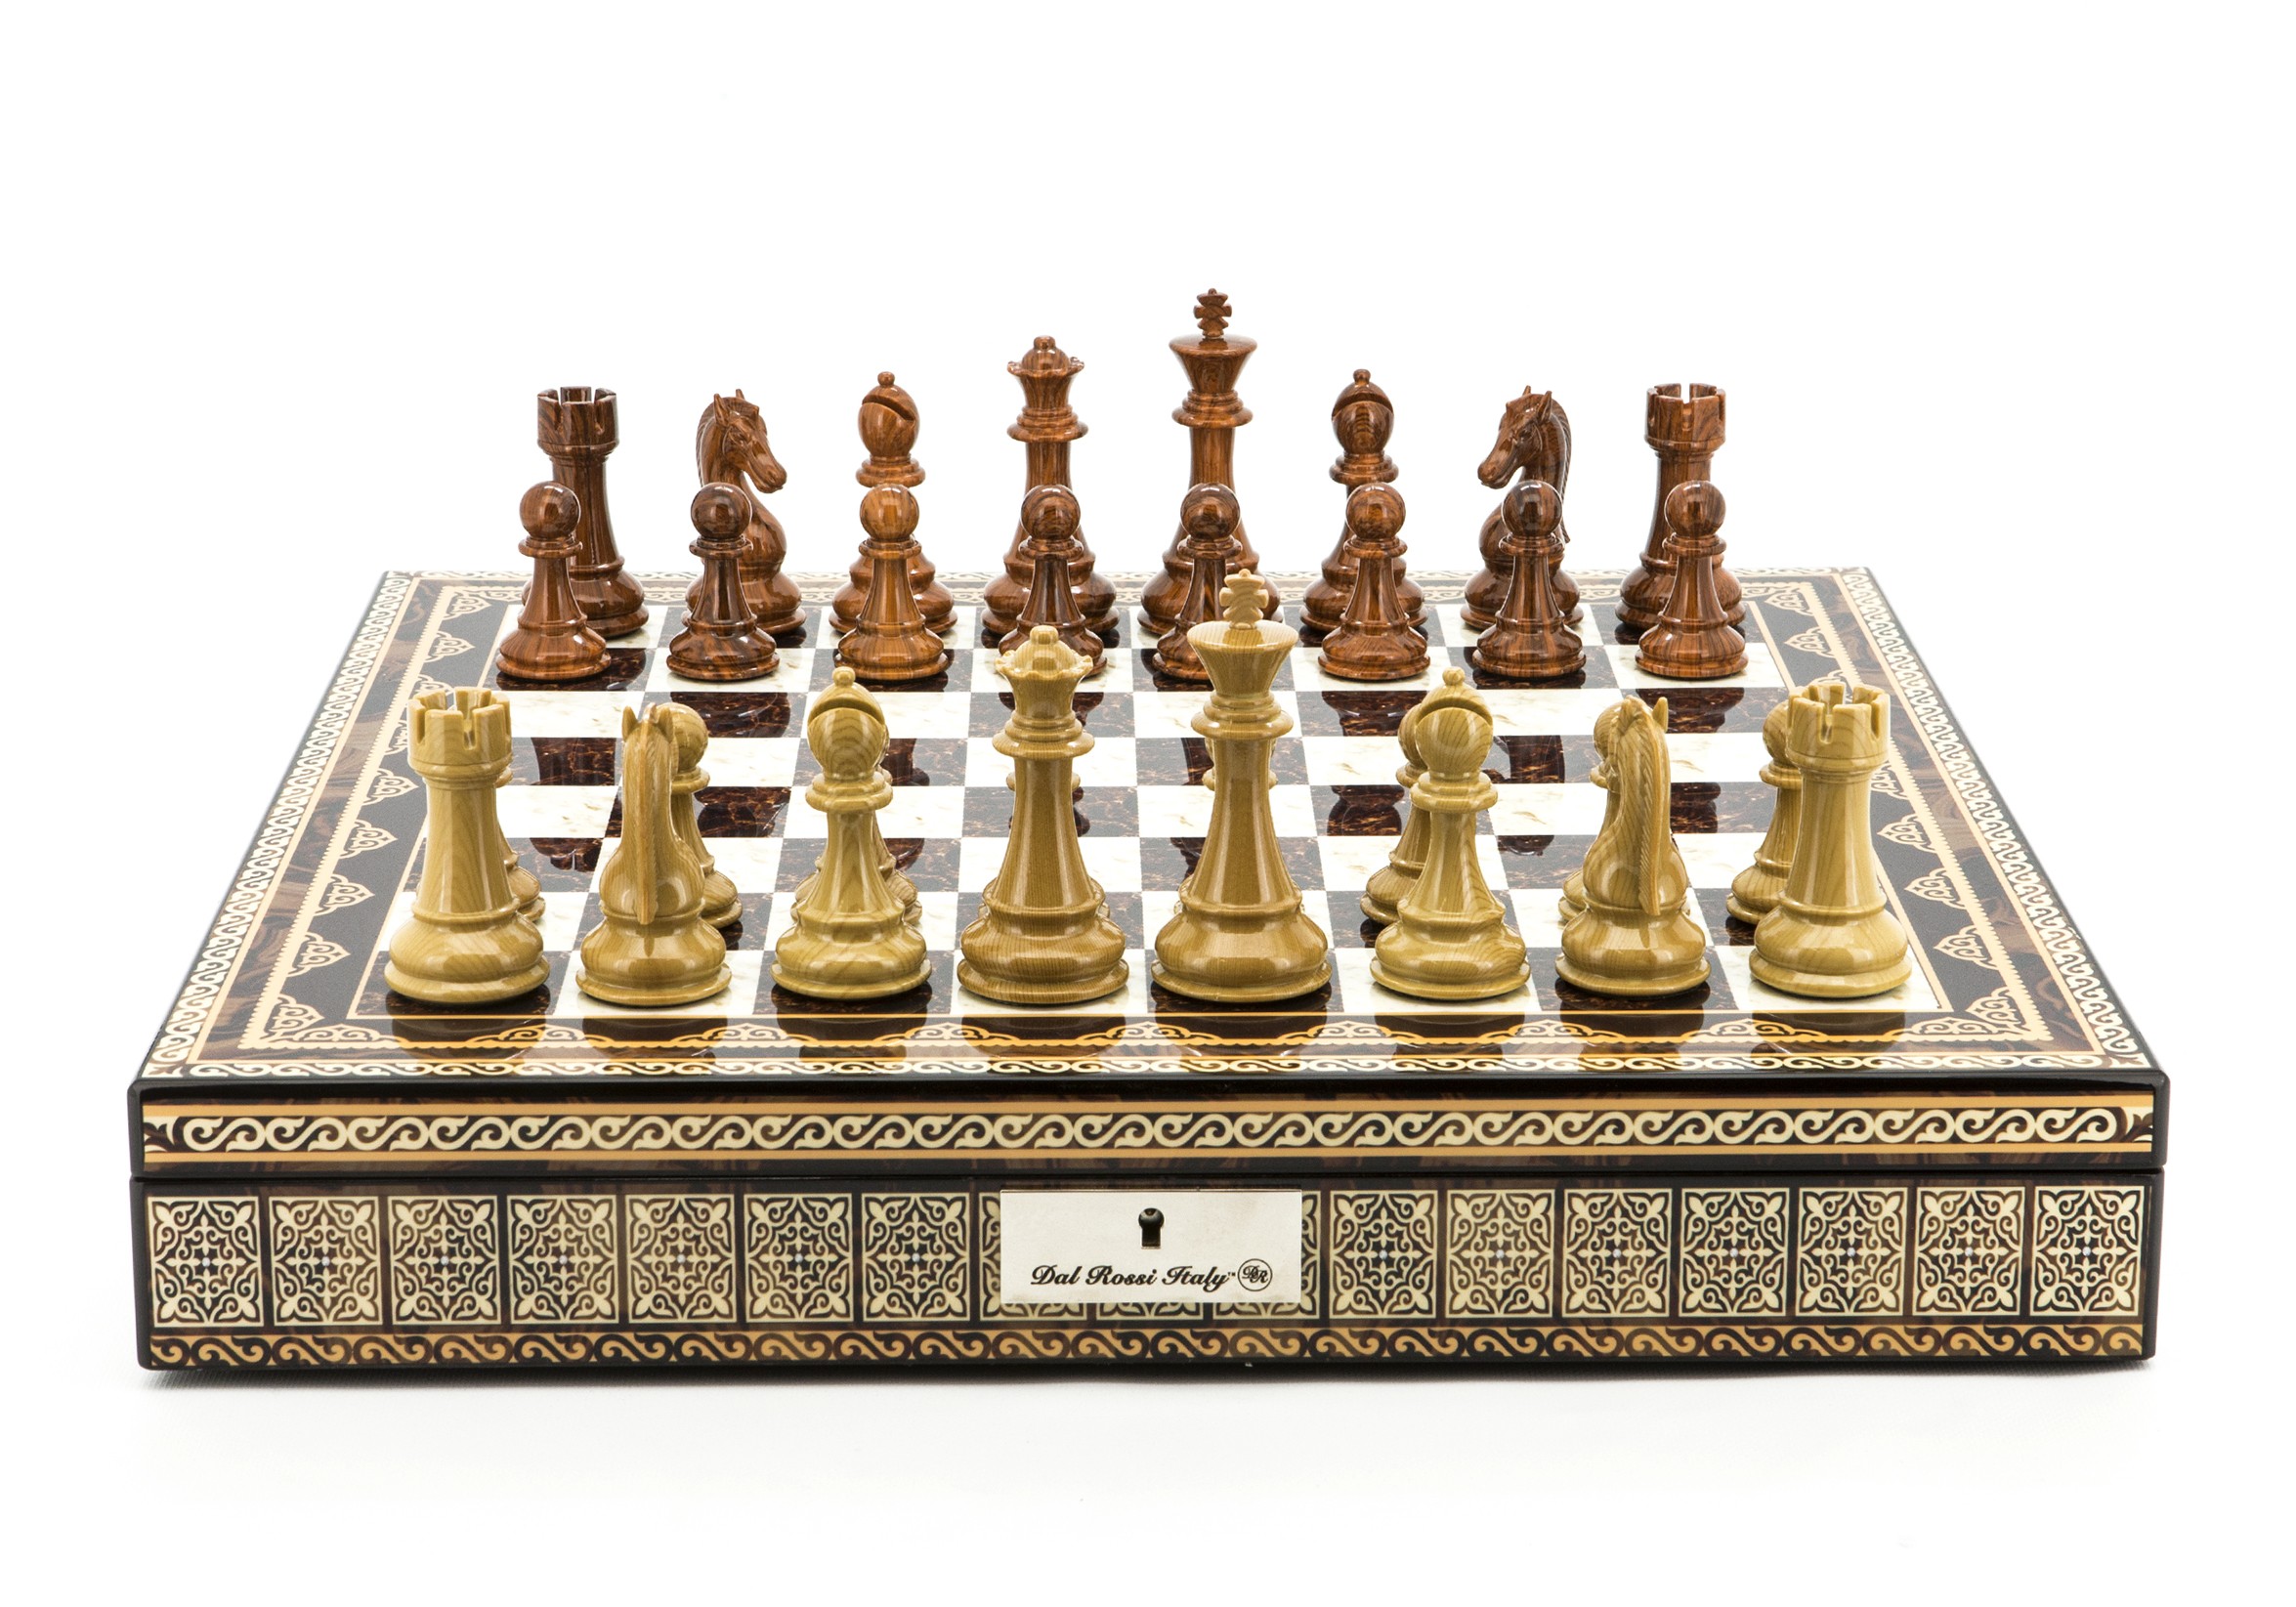 Dal Rossi Italy Chess Set Mosaic Shinny Finish 20″ With Compartments, Brown and Box Wood Grain Finish Chess Pieces 110mm